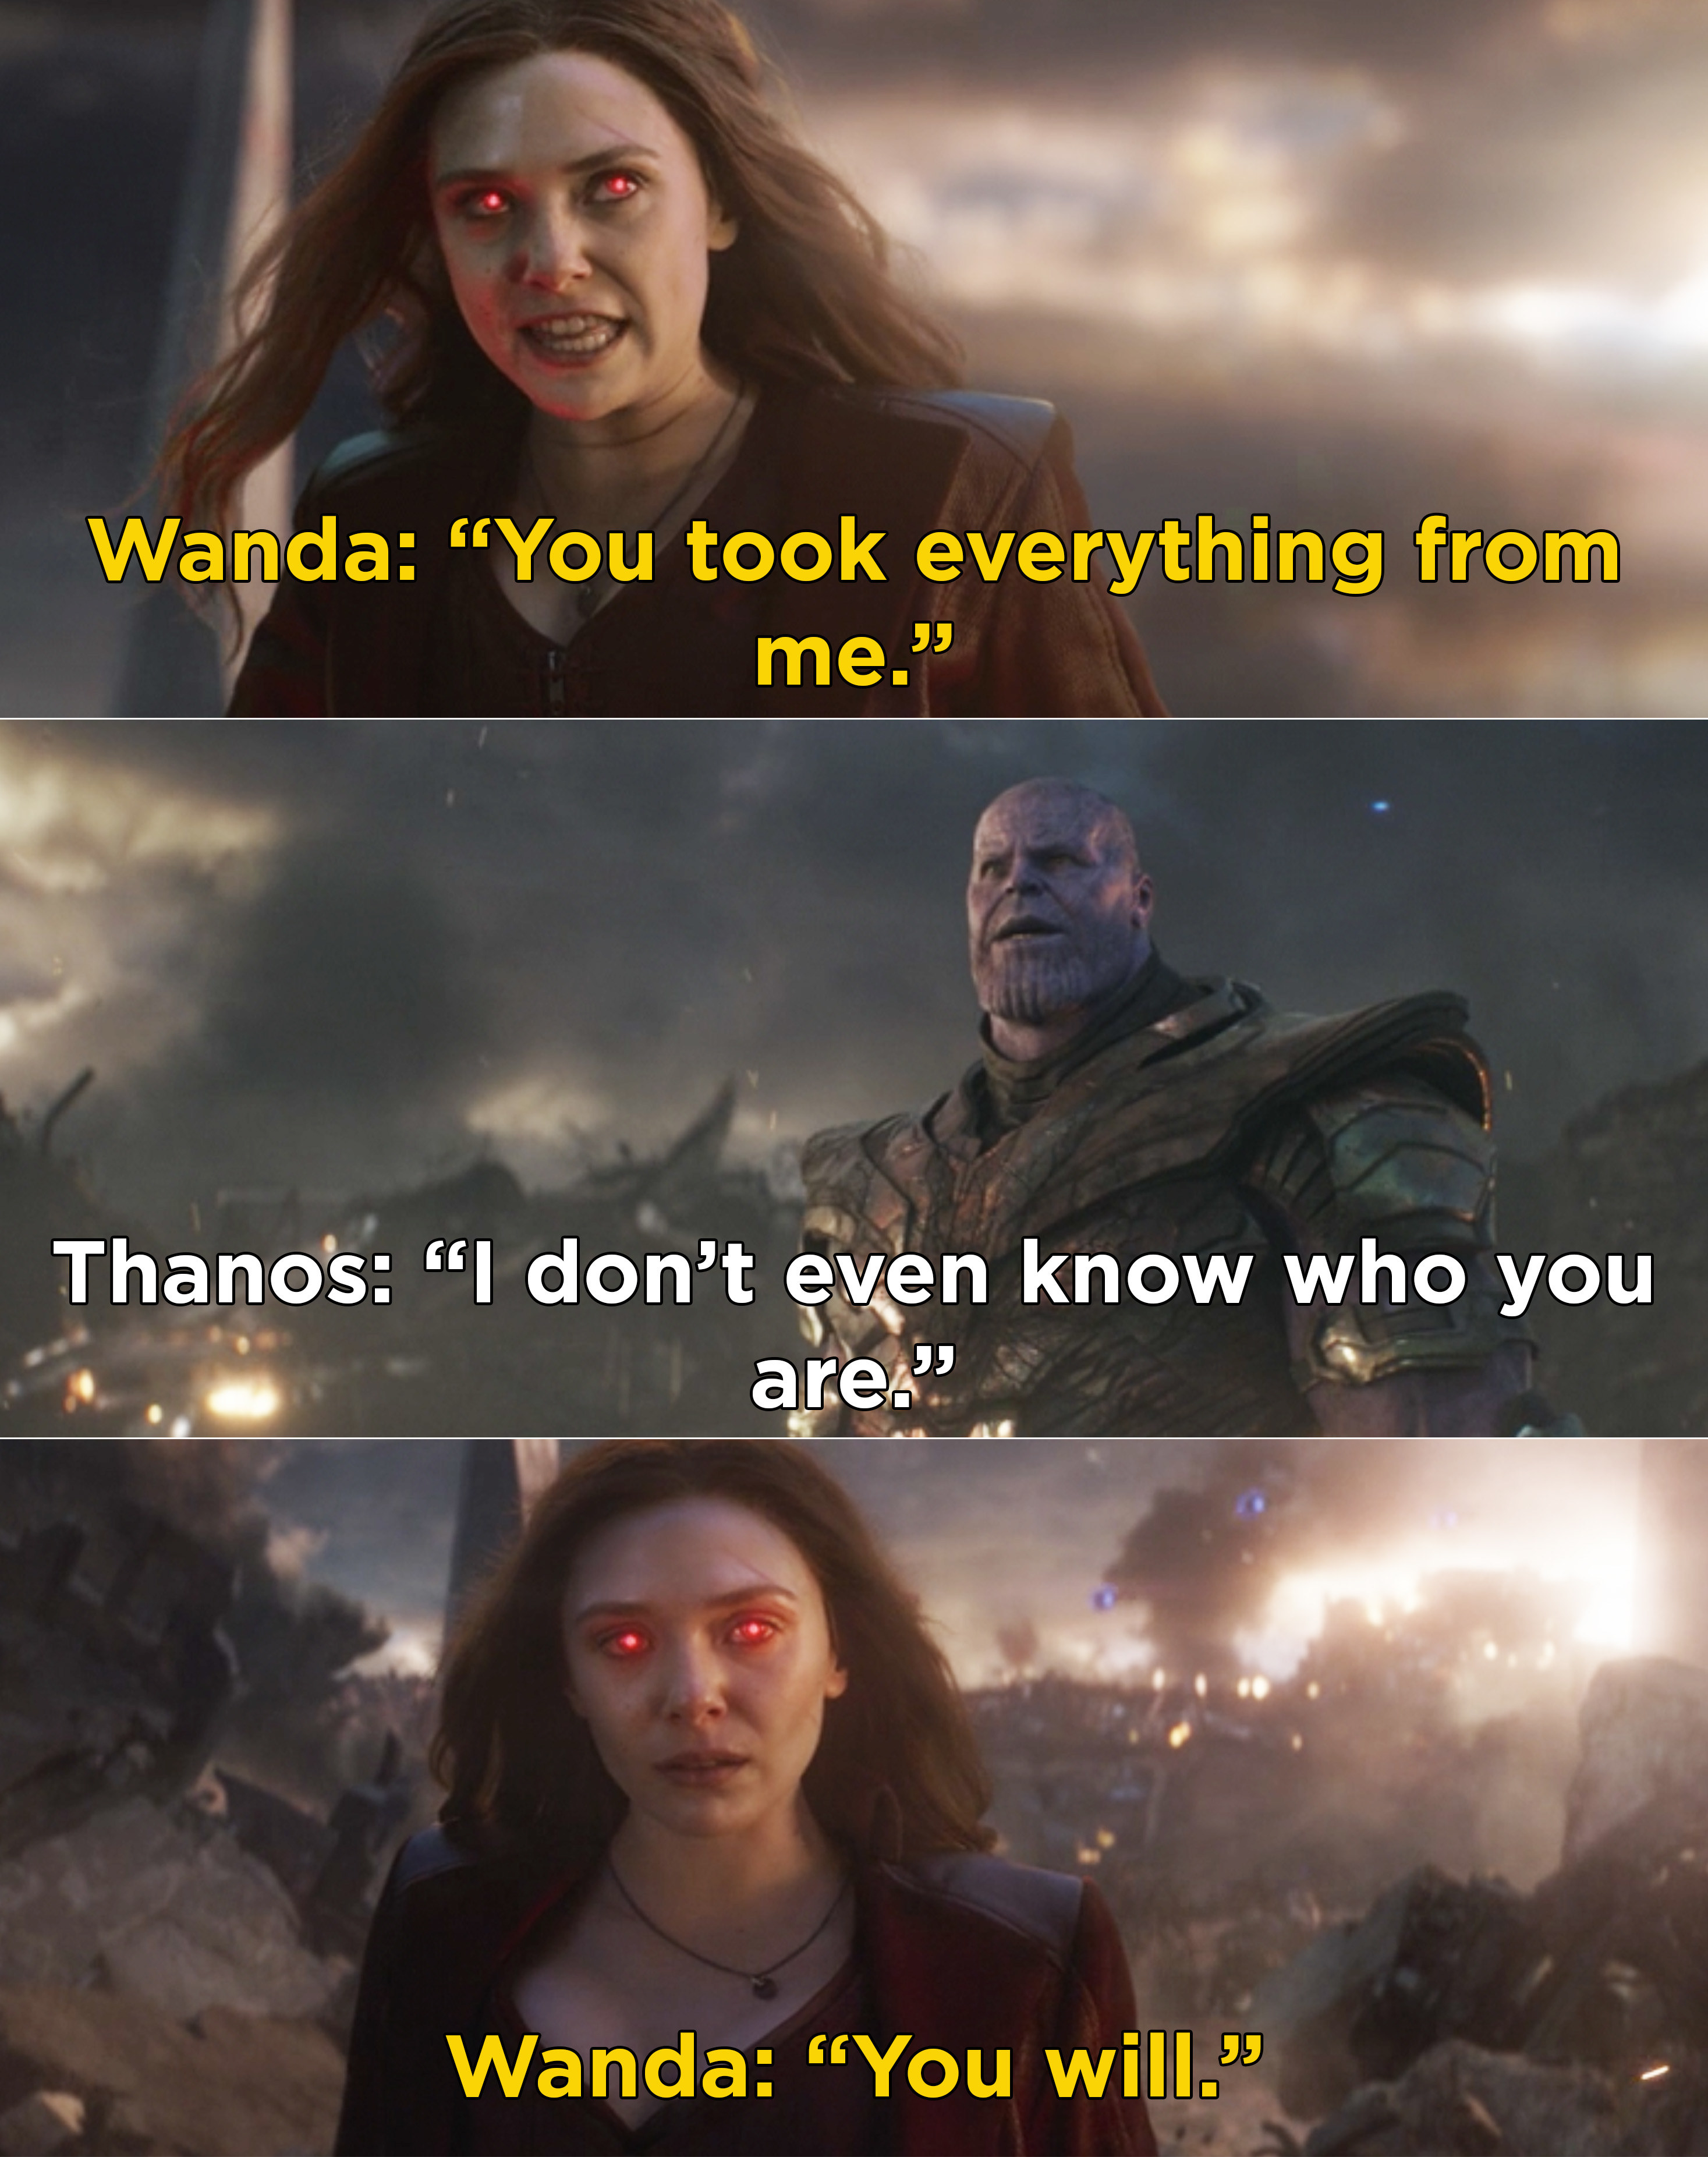 Wanda saying, &quot;You took everything from me&quot; and Thanos responding that he doesn&#x27;t even know who she is. And Wanda saying, &quot;You will&quot;